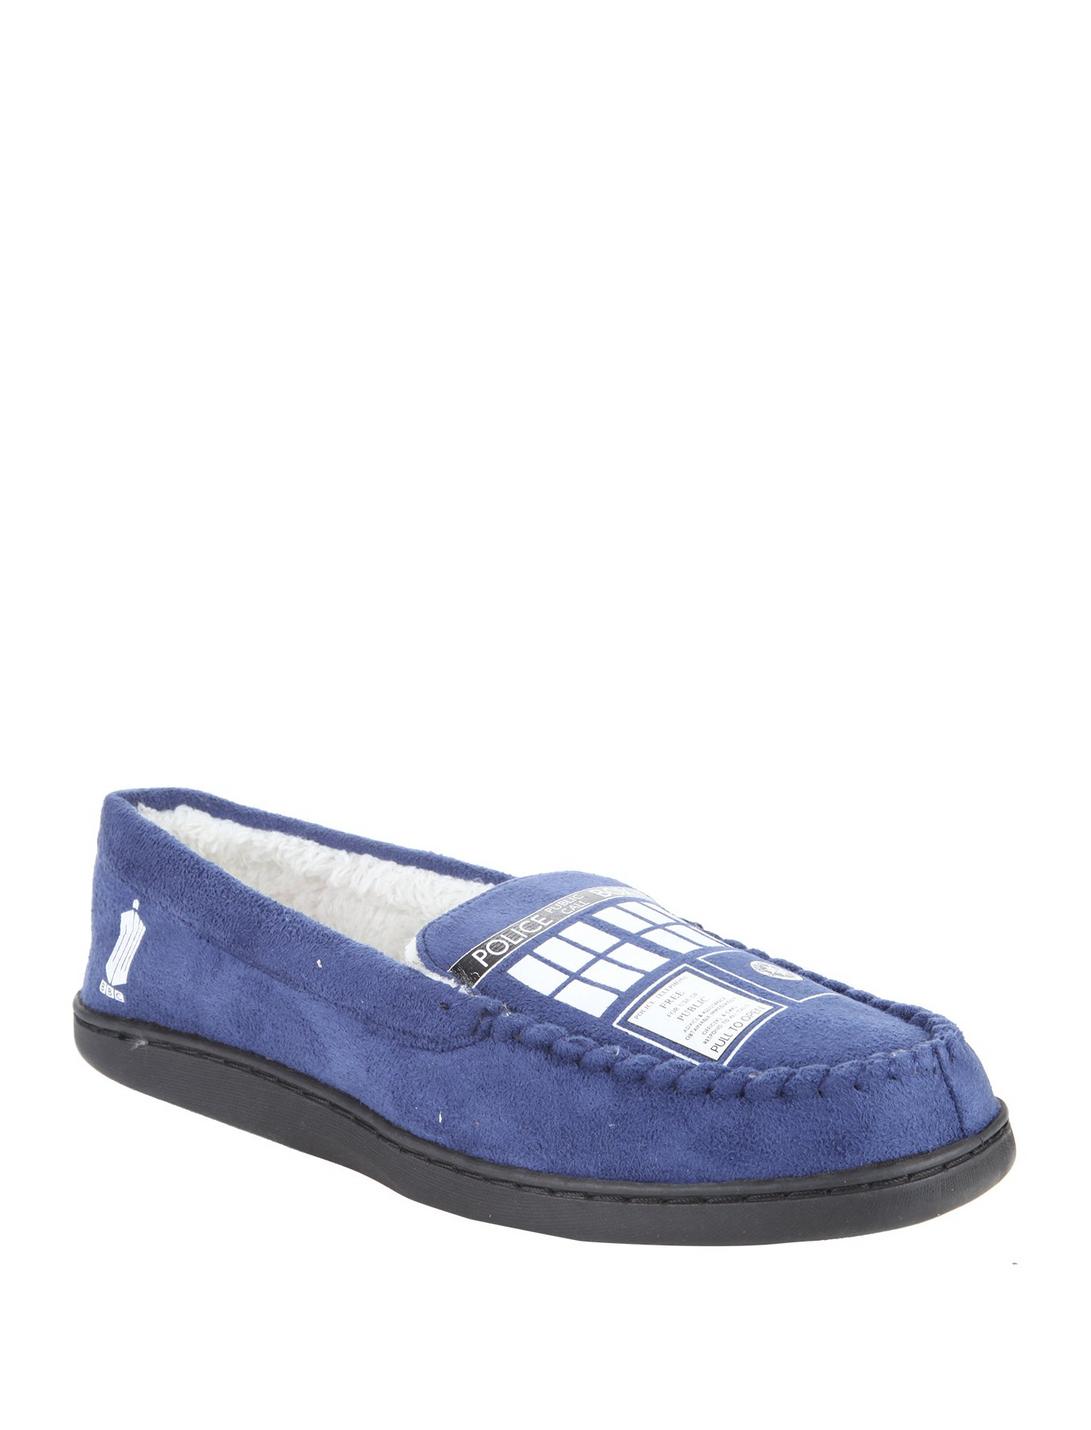 Doctor Who TARDIS Guys Moccasin Slippers, BLACK, hi-res